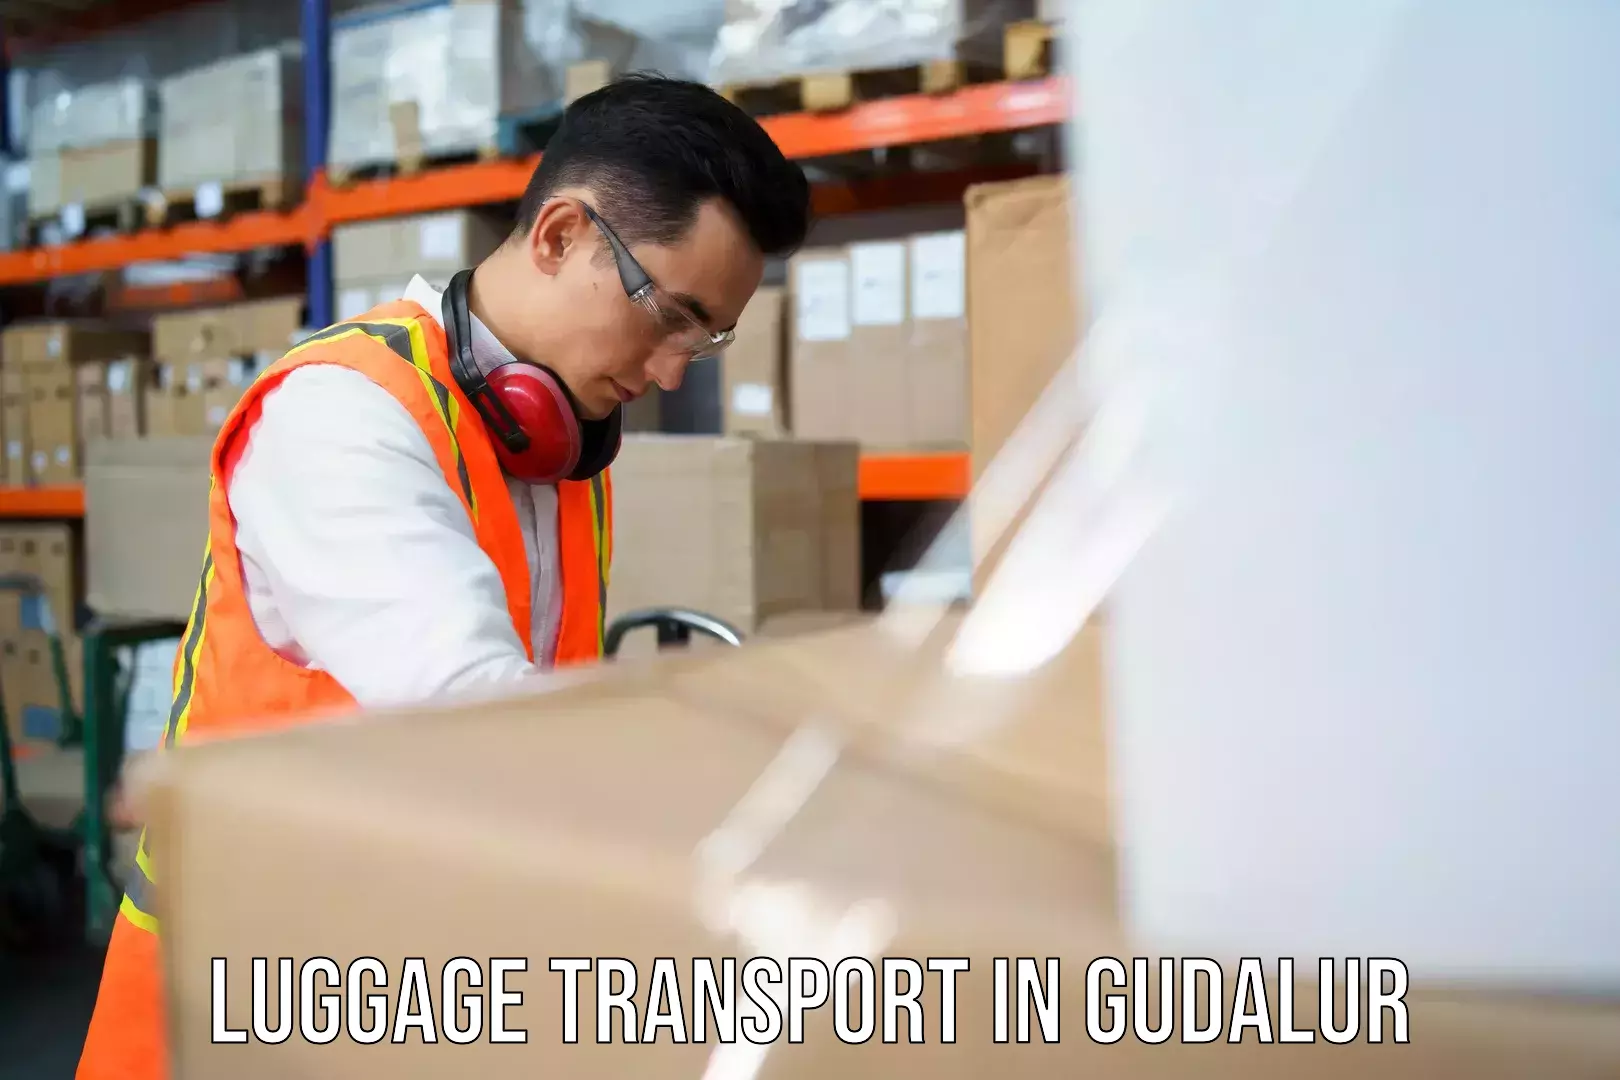 Baggage transport network in Gudalur